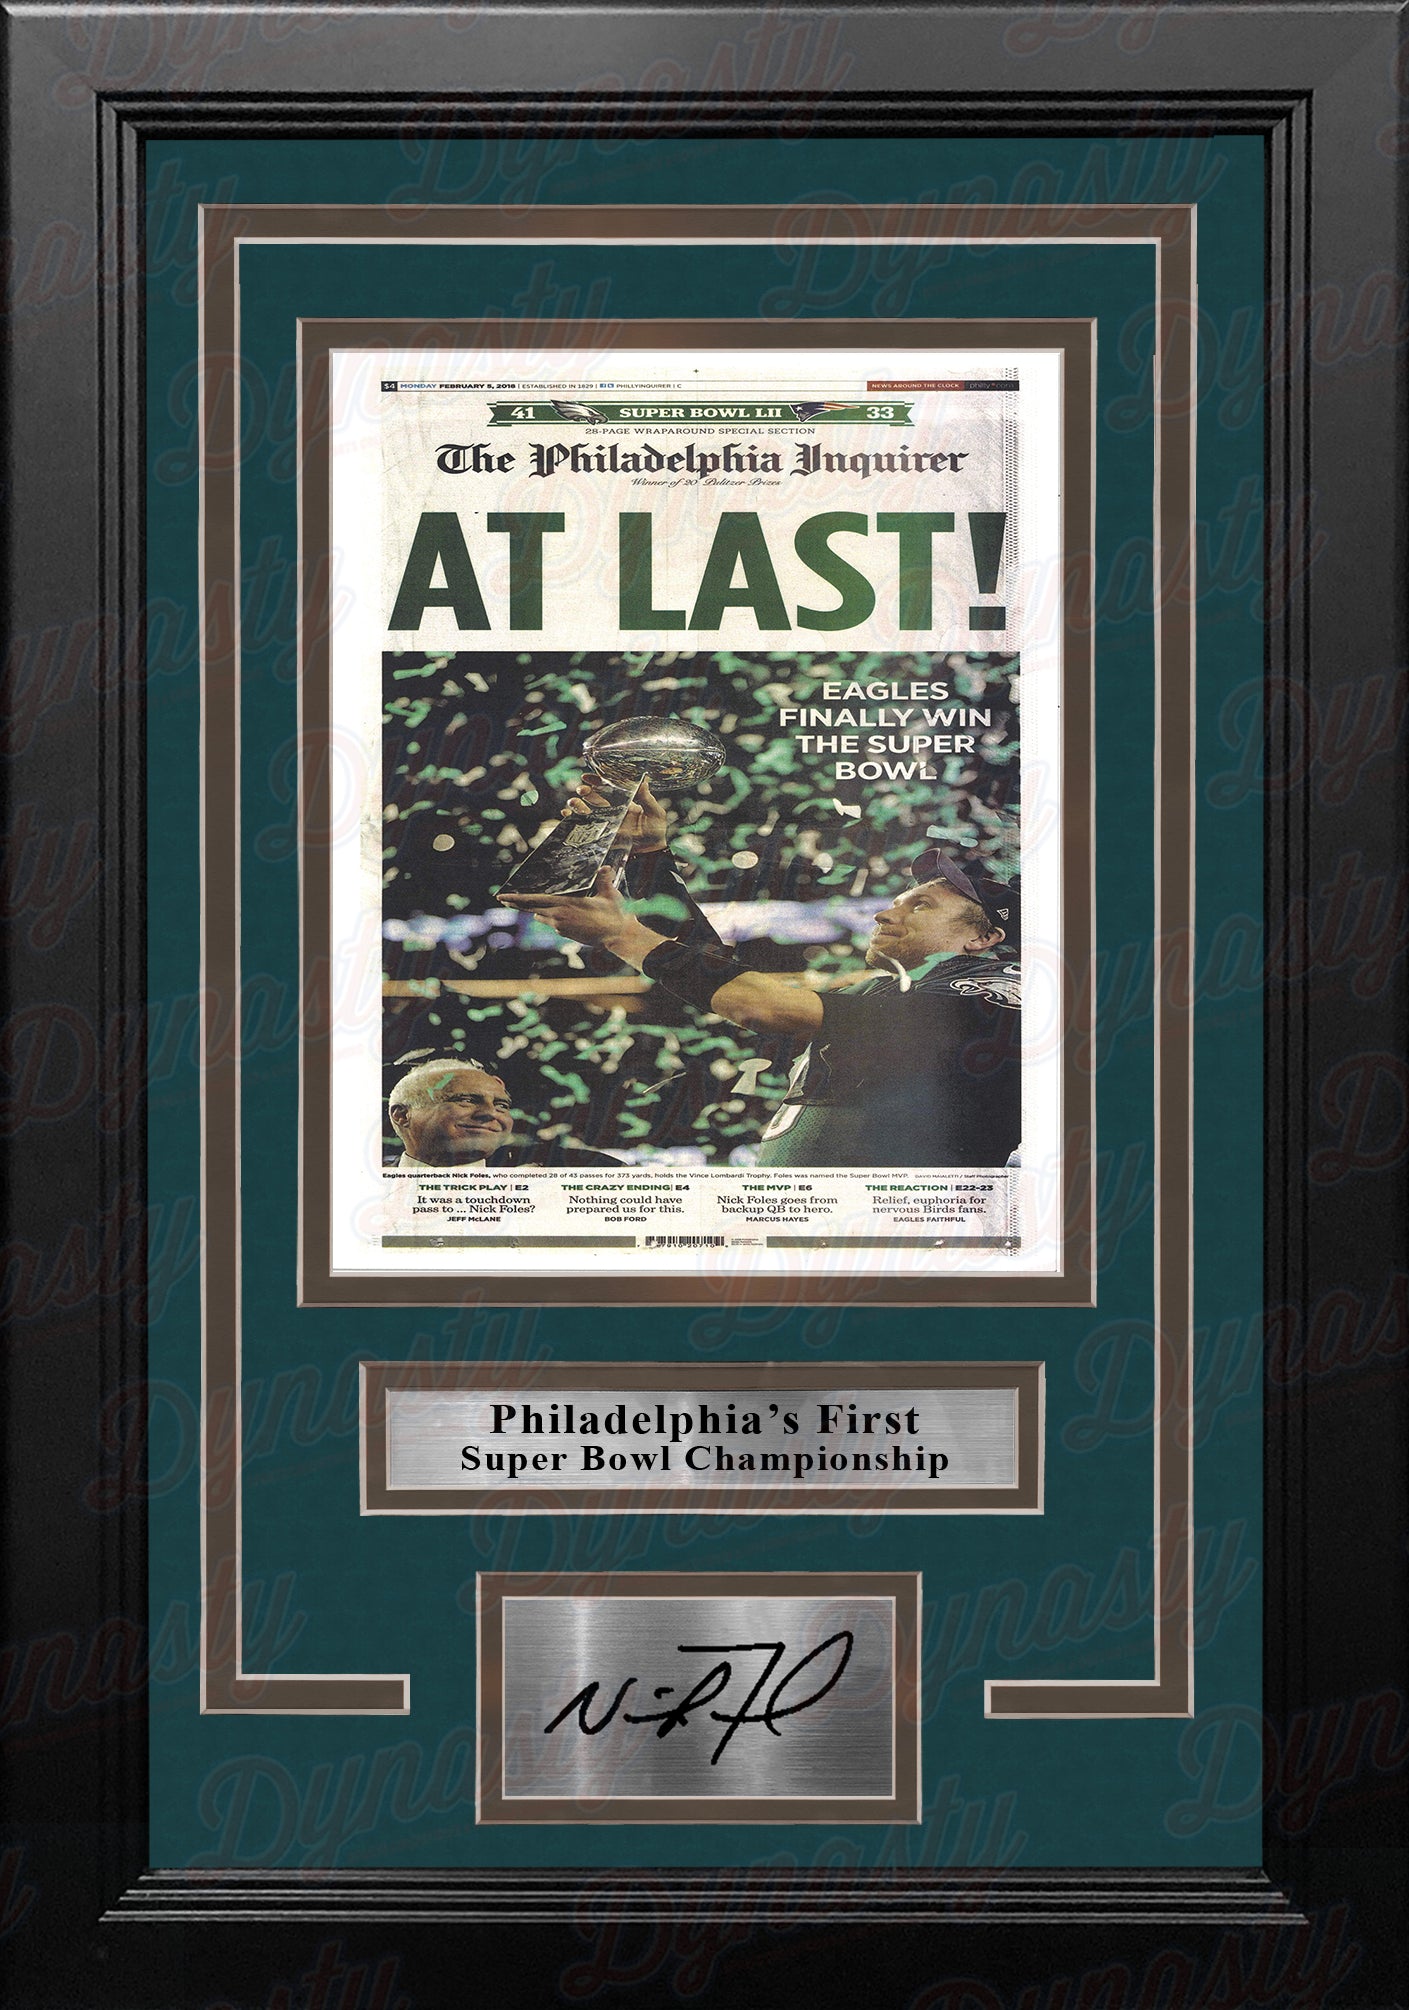 Philadelphia Eagles Super Bowl Champions Inquirer Framed Photo with Nick Foles Engraved Autograph - Dynasty Sports & Framing 